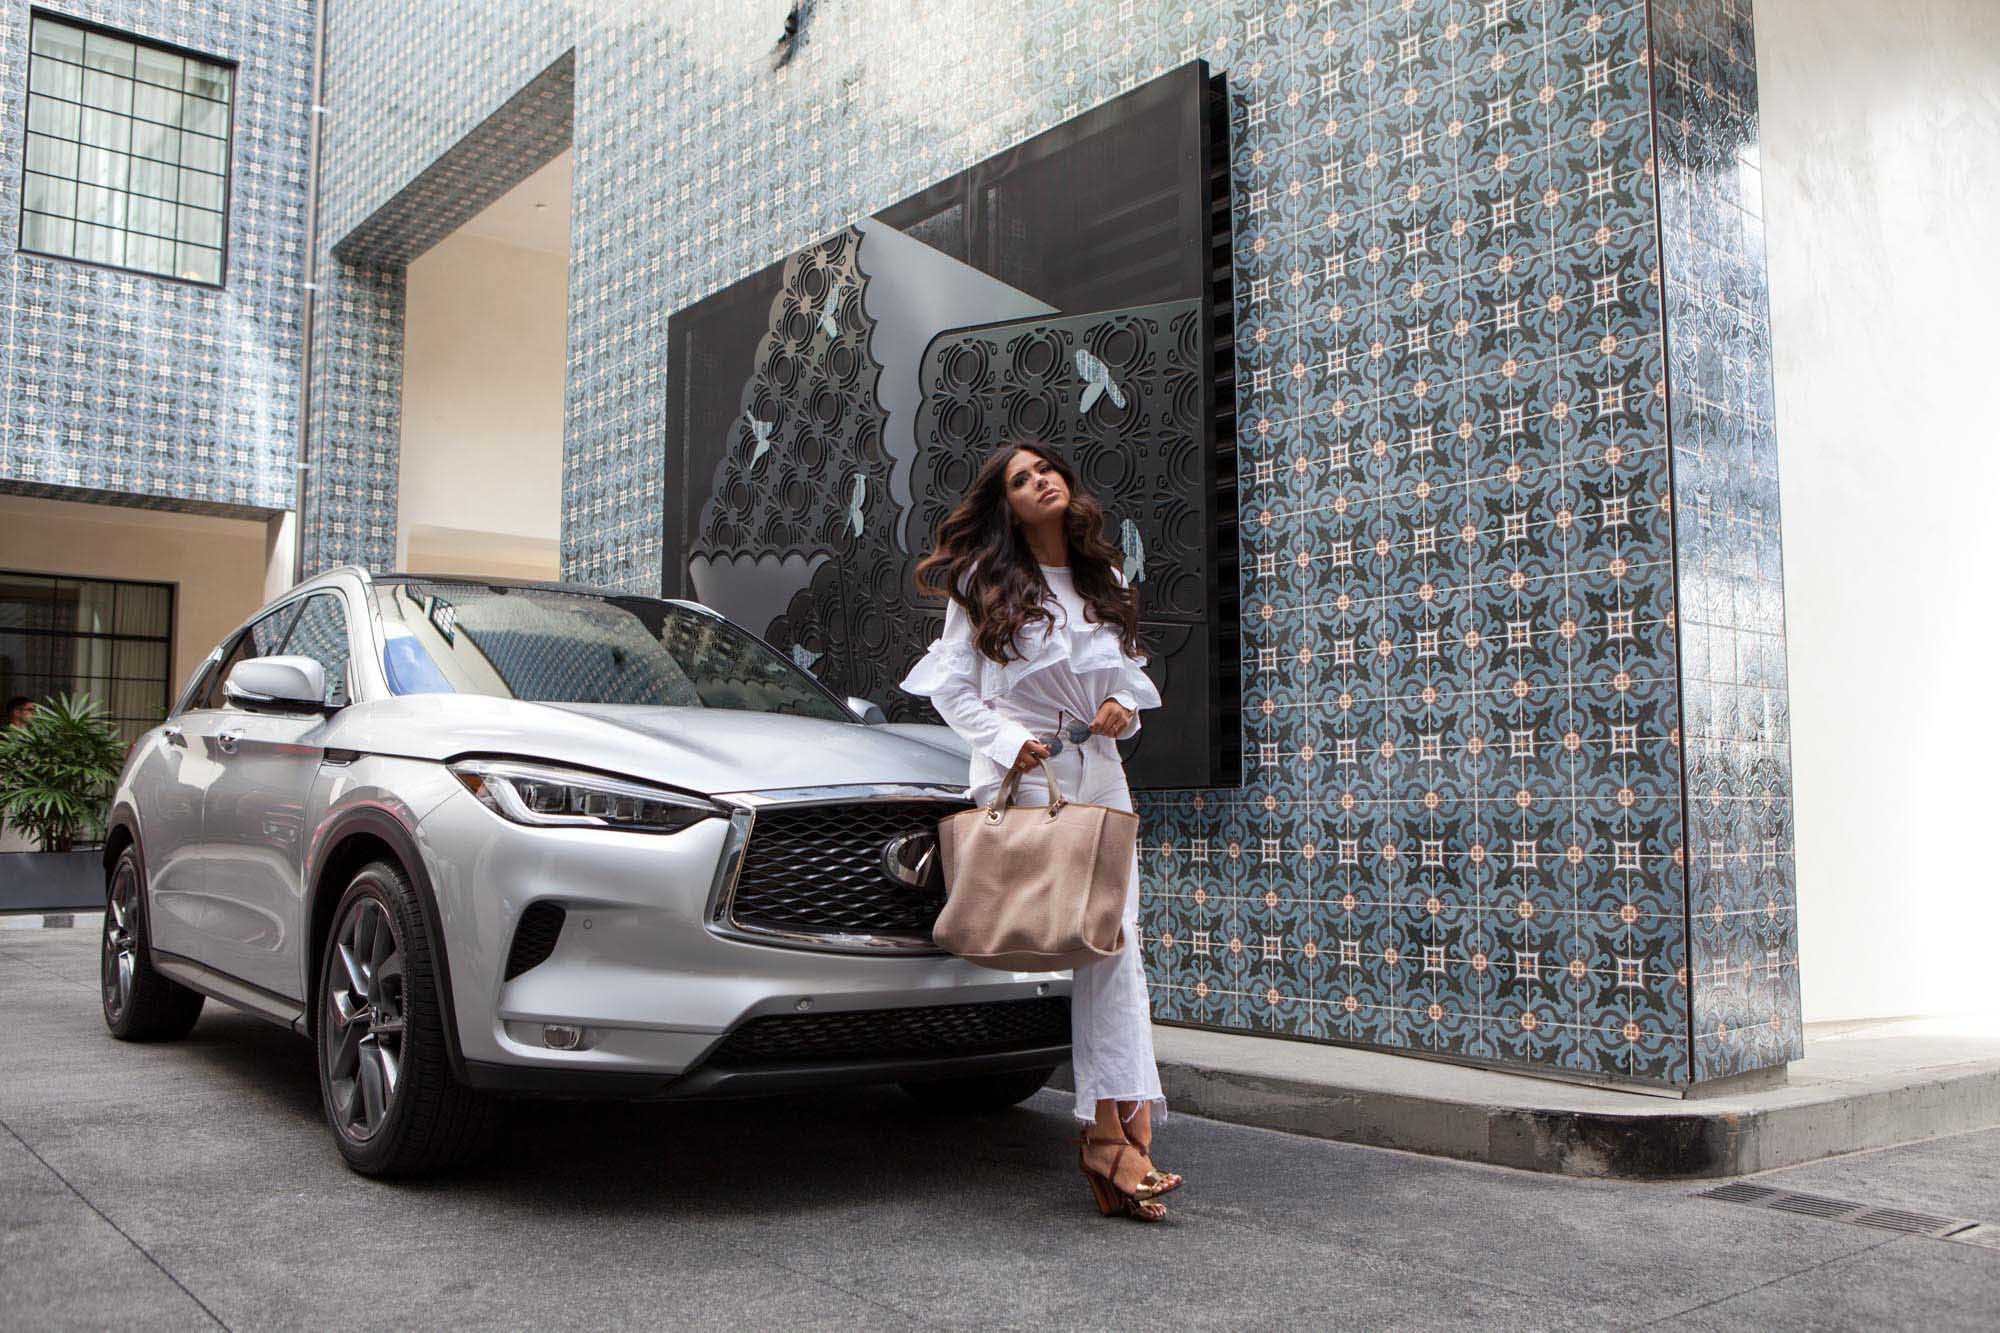 Emily Ann Gemma(@emilyanngemma) - Fashion Photography, driving and posing in front of new Infiniti QX50